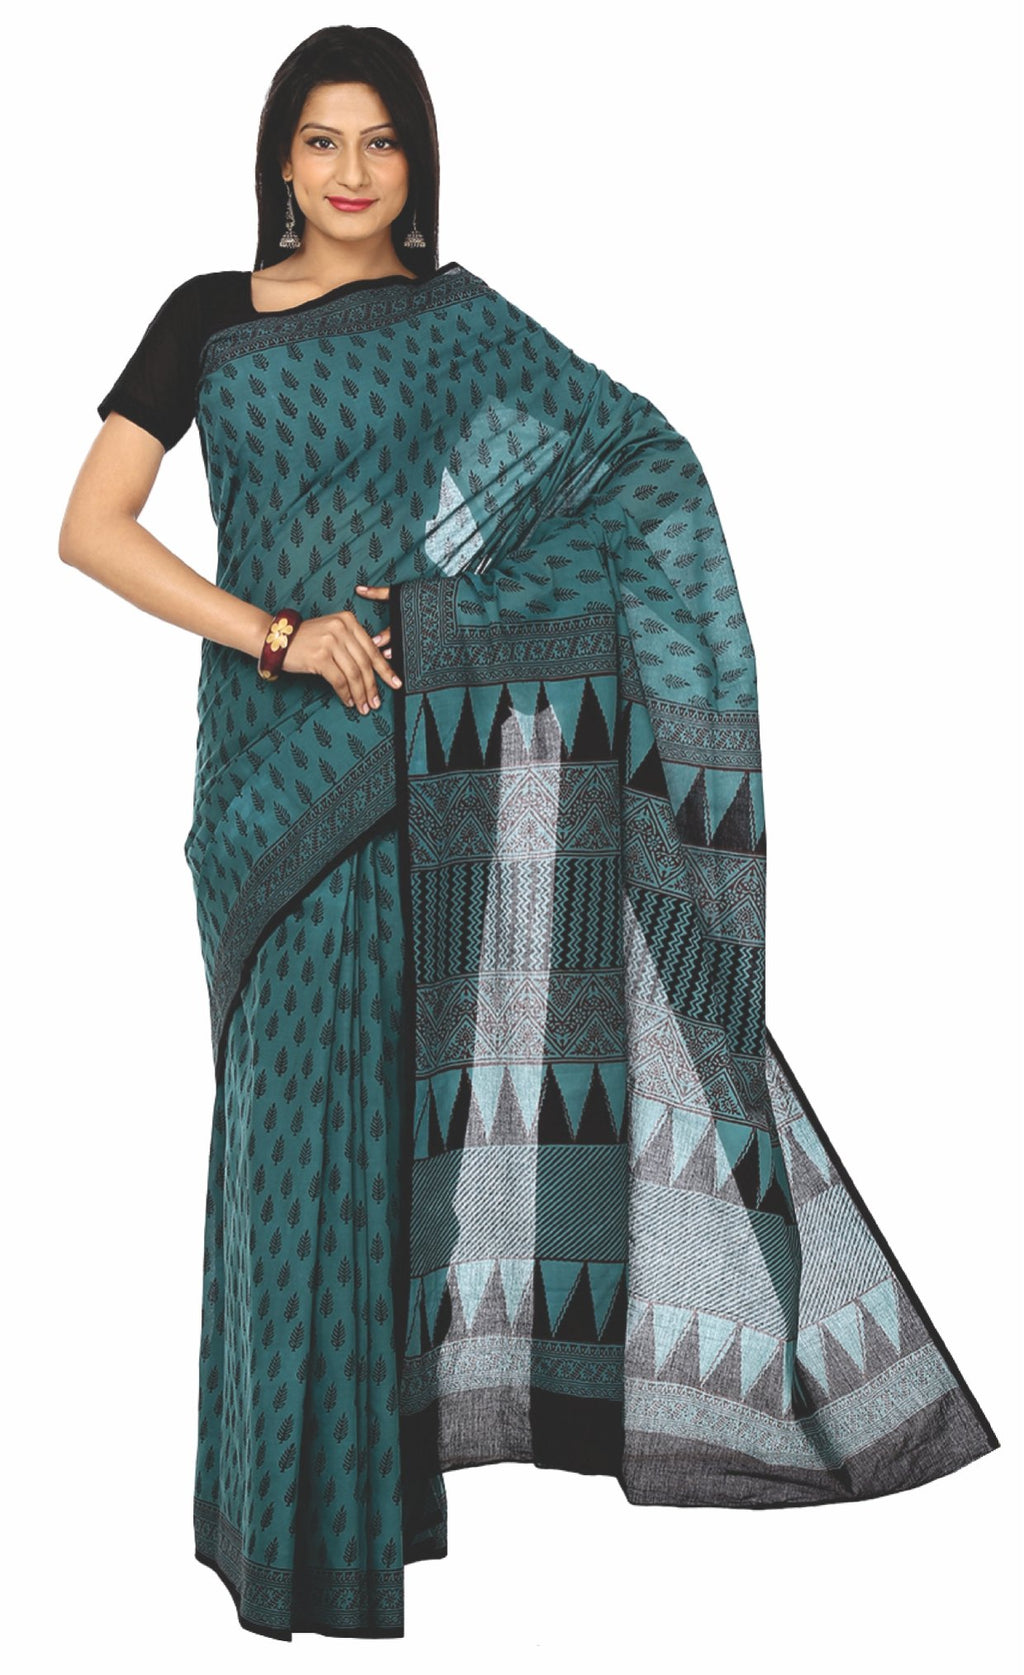 Kalakari India Teal Green Bagh Handblock Print Handcrafted Cotton Saree-Saree-Kalakari India-ZIBASA0017-Bagh, Cotton, Geographical Indication, Hand Blocks, Hand Crafted, Heritage Prints, Natural Dyes, Sarees, Sustainable Fabrics-[Linen,Ethnic,wear,Fashionista,Handloom,Handicraft,Indigo,blockprint,block,print,Cotton,Chanderi,Blue, latest,classy,party,bollywood,trendy,summer,style,traditional,formal,elegant,unique,style,hand,block,print, dabu,booti,gift,present,glamorous,affordable,collectible,Sar